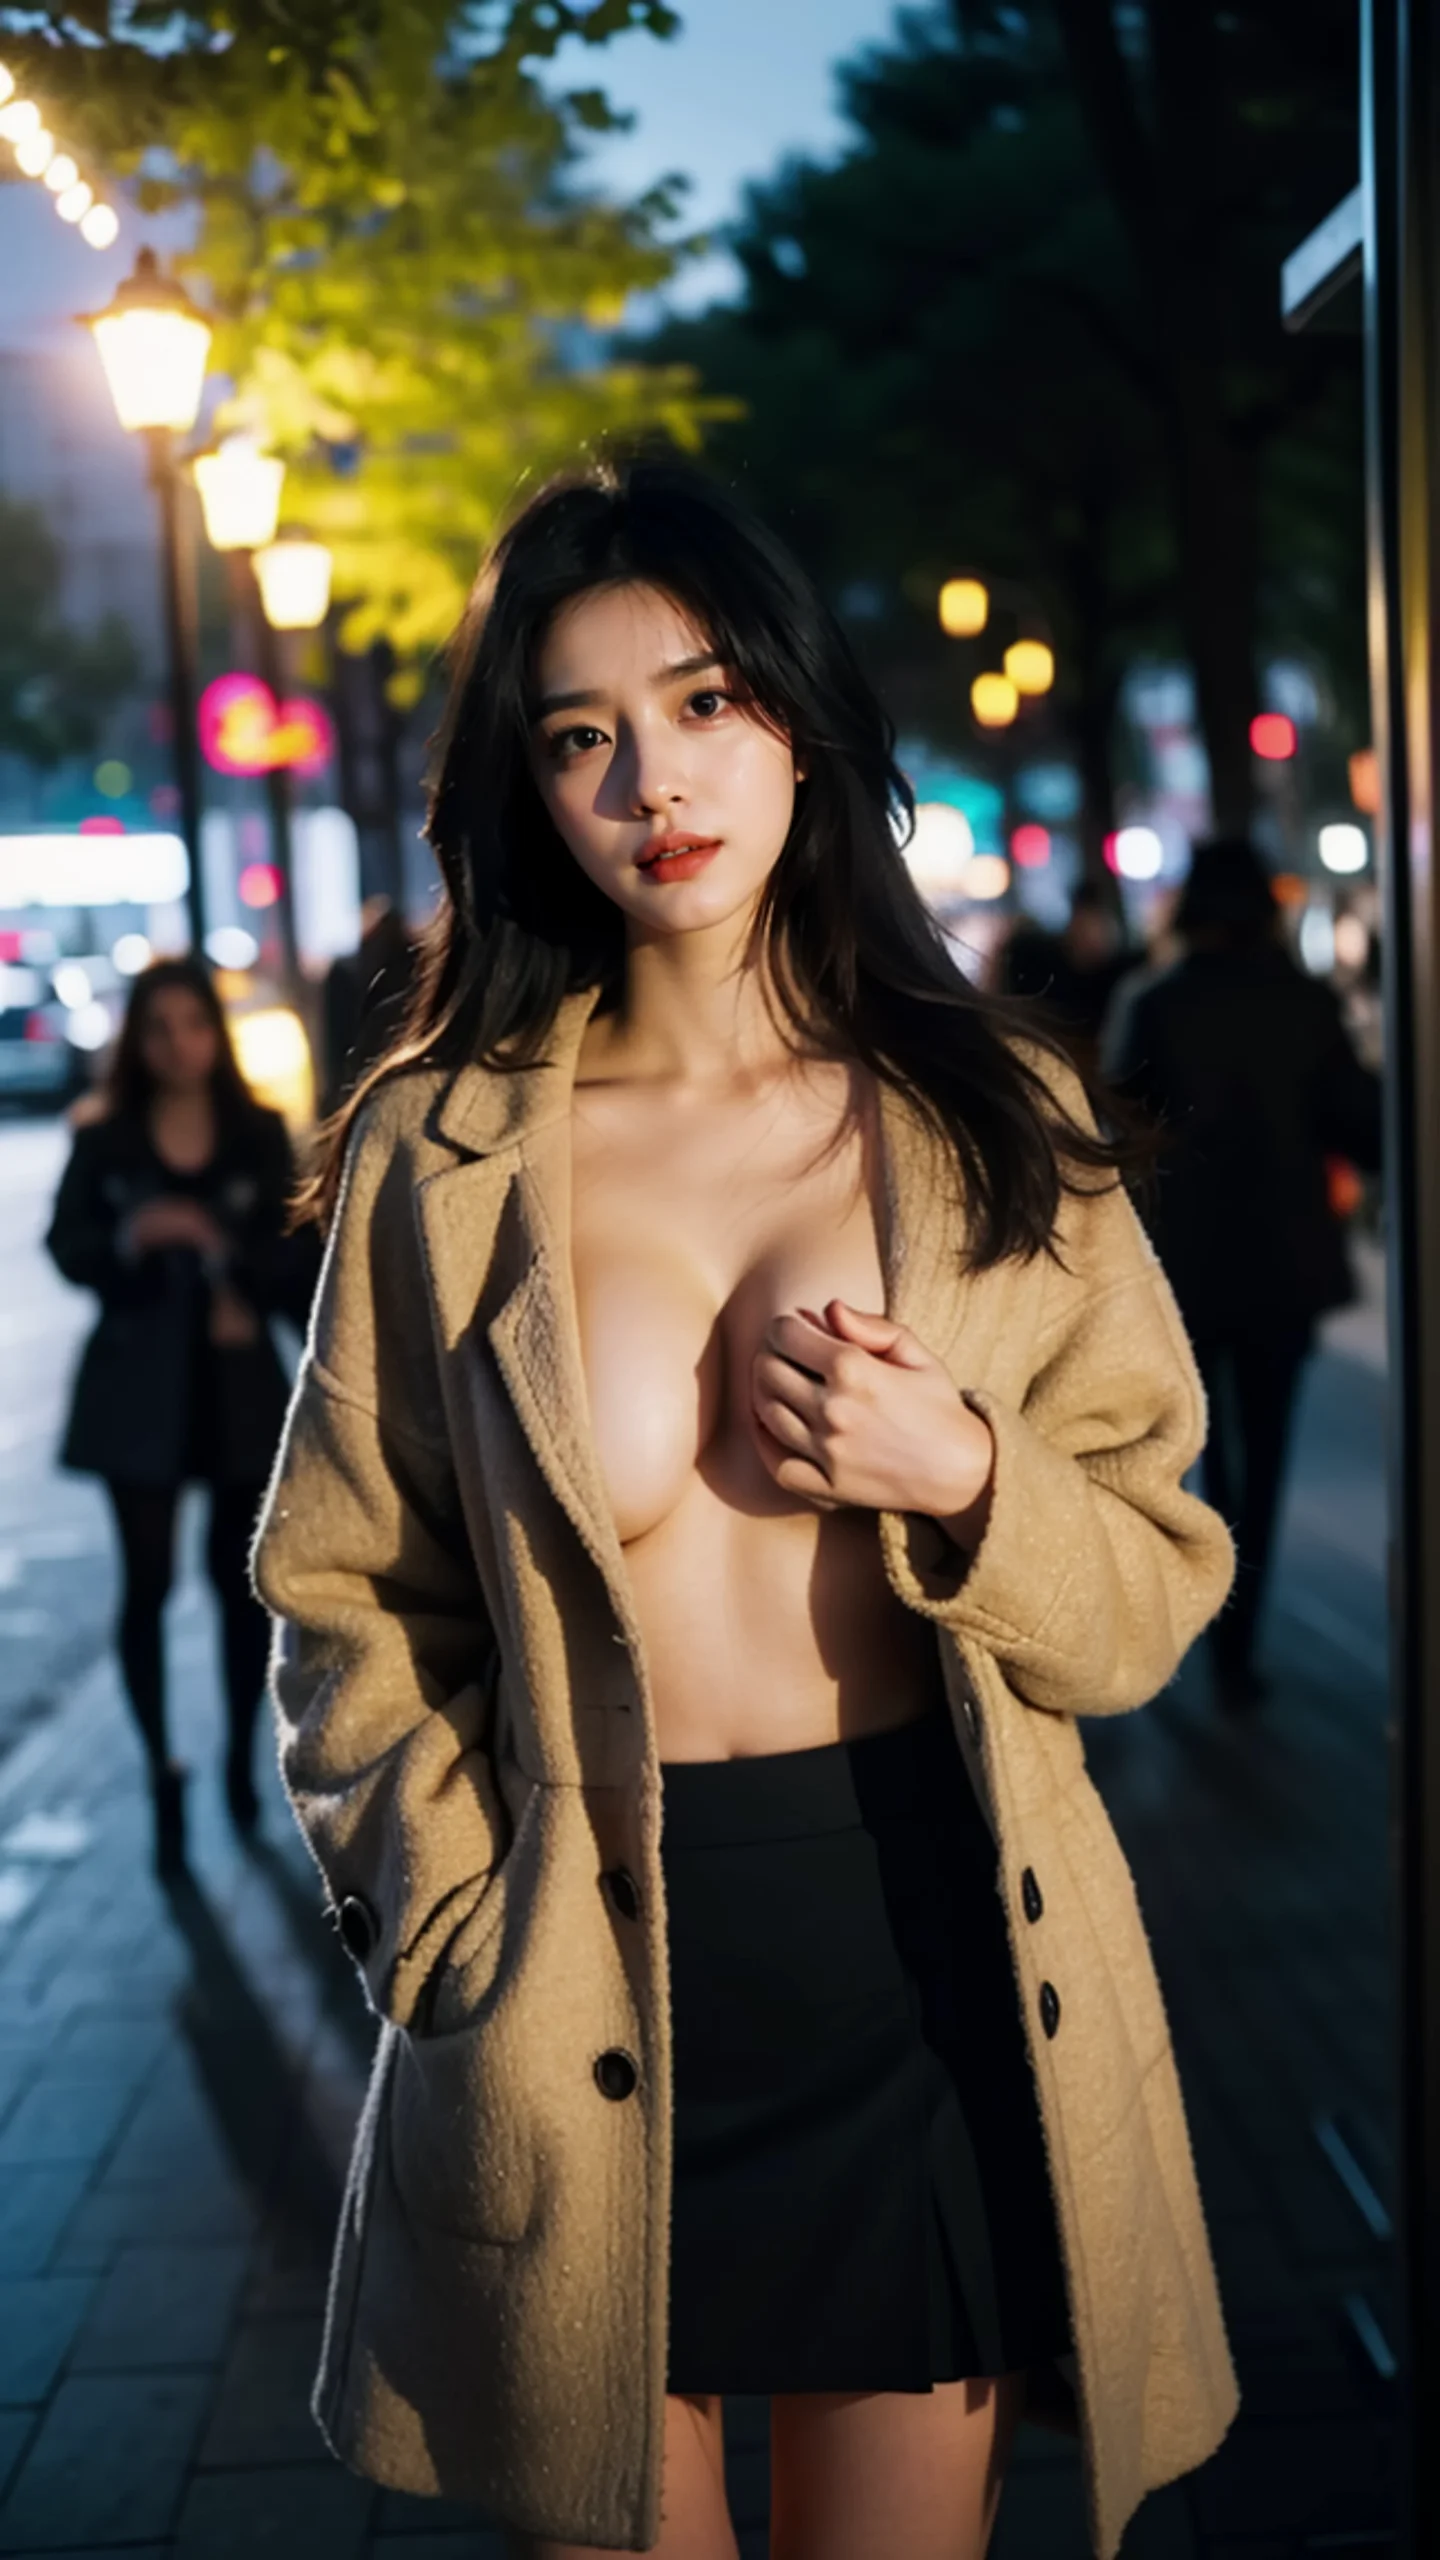 Woman Covering Chest With Hands Images 02